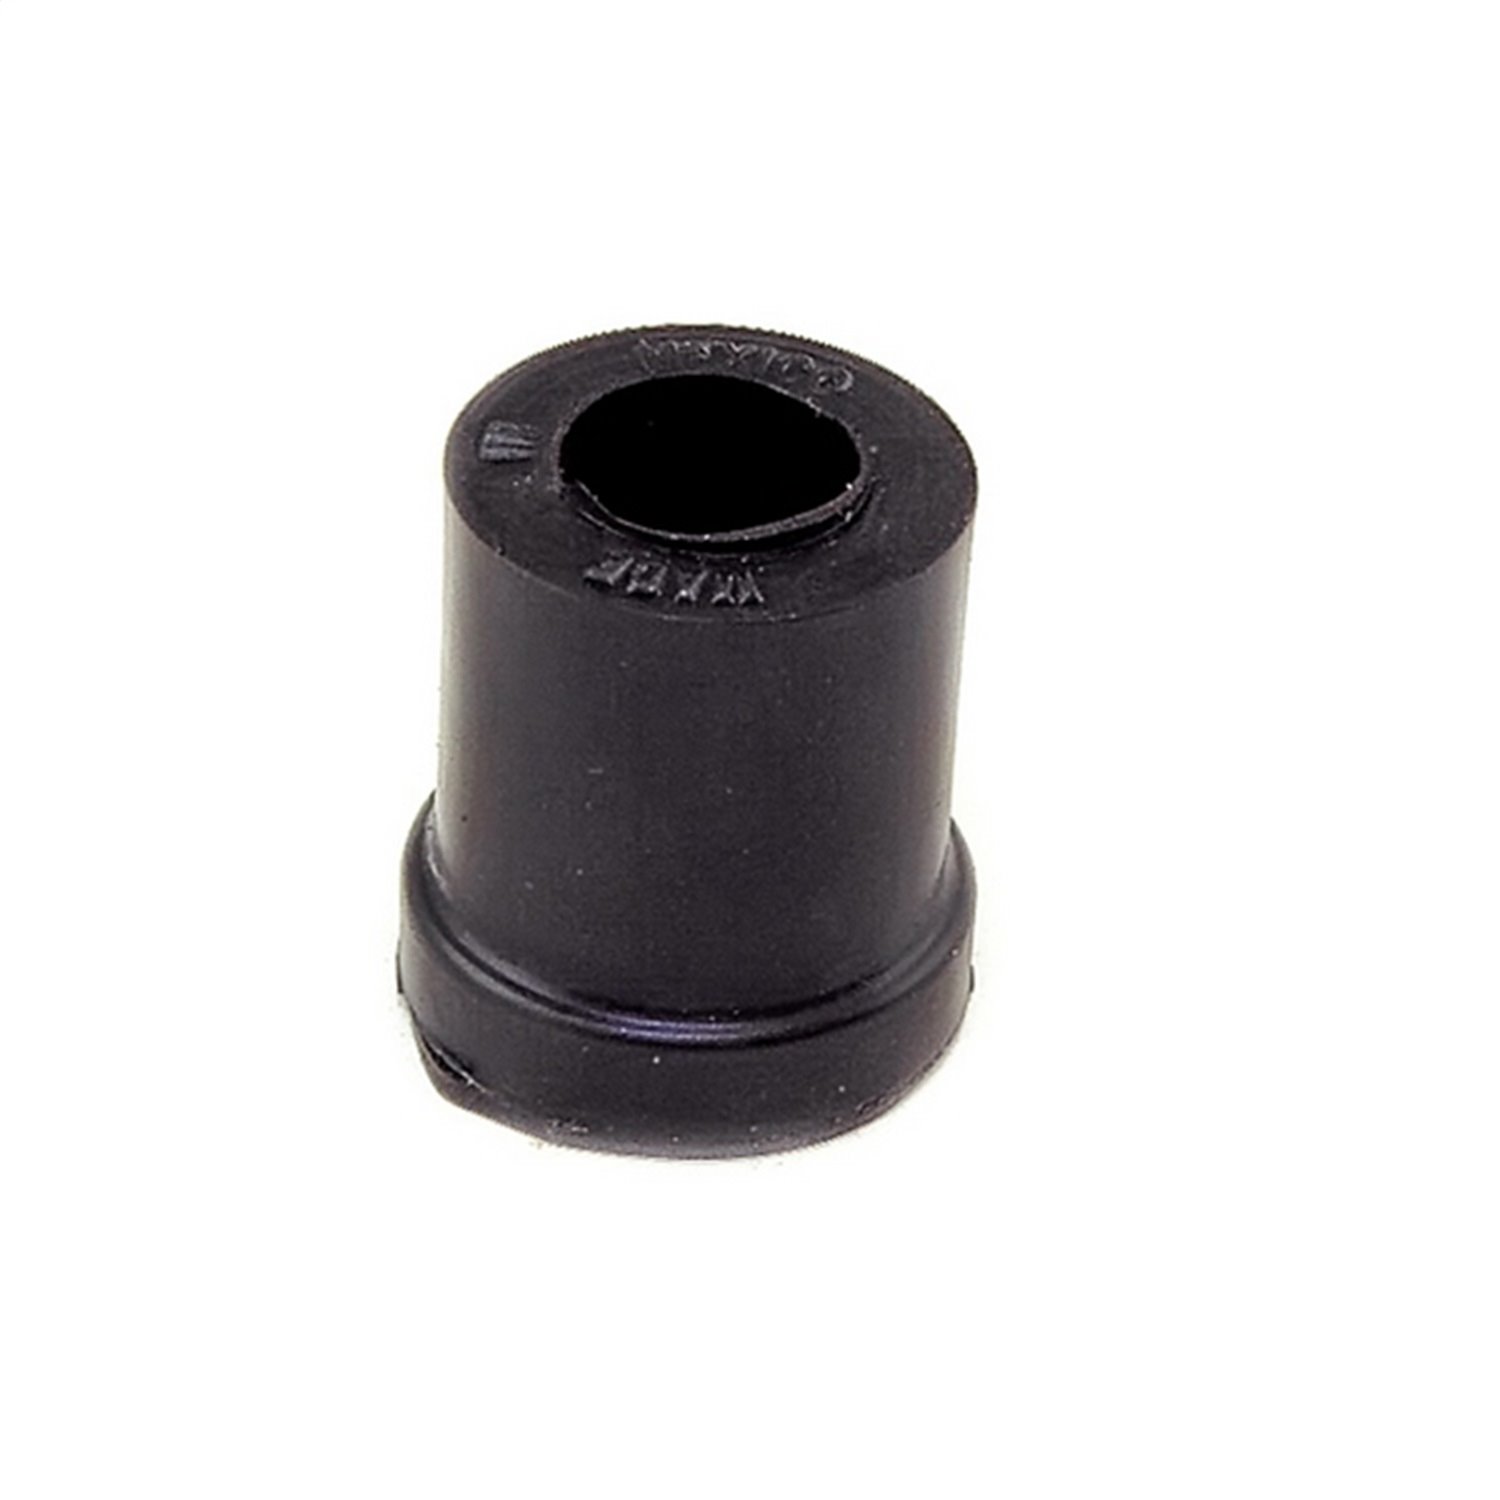 Replacement rear leaf spring eye bushing from Omix-ADA, Fits 46-64 Willys pickups station wagons and Jeepsters.